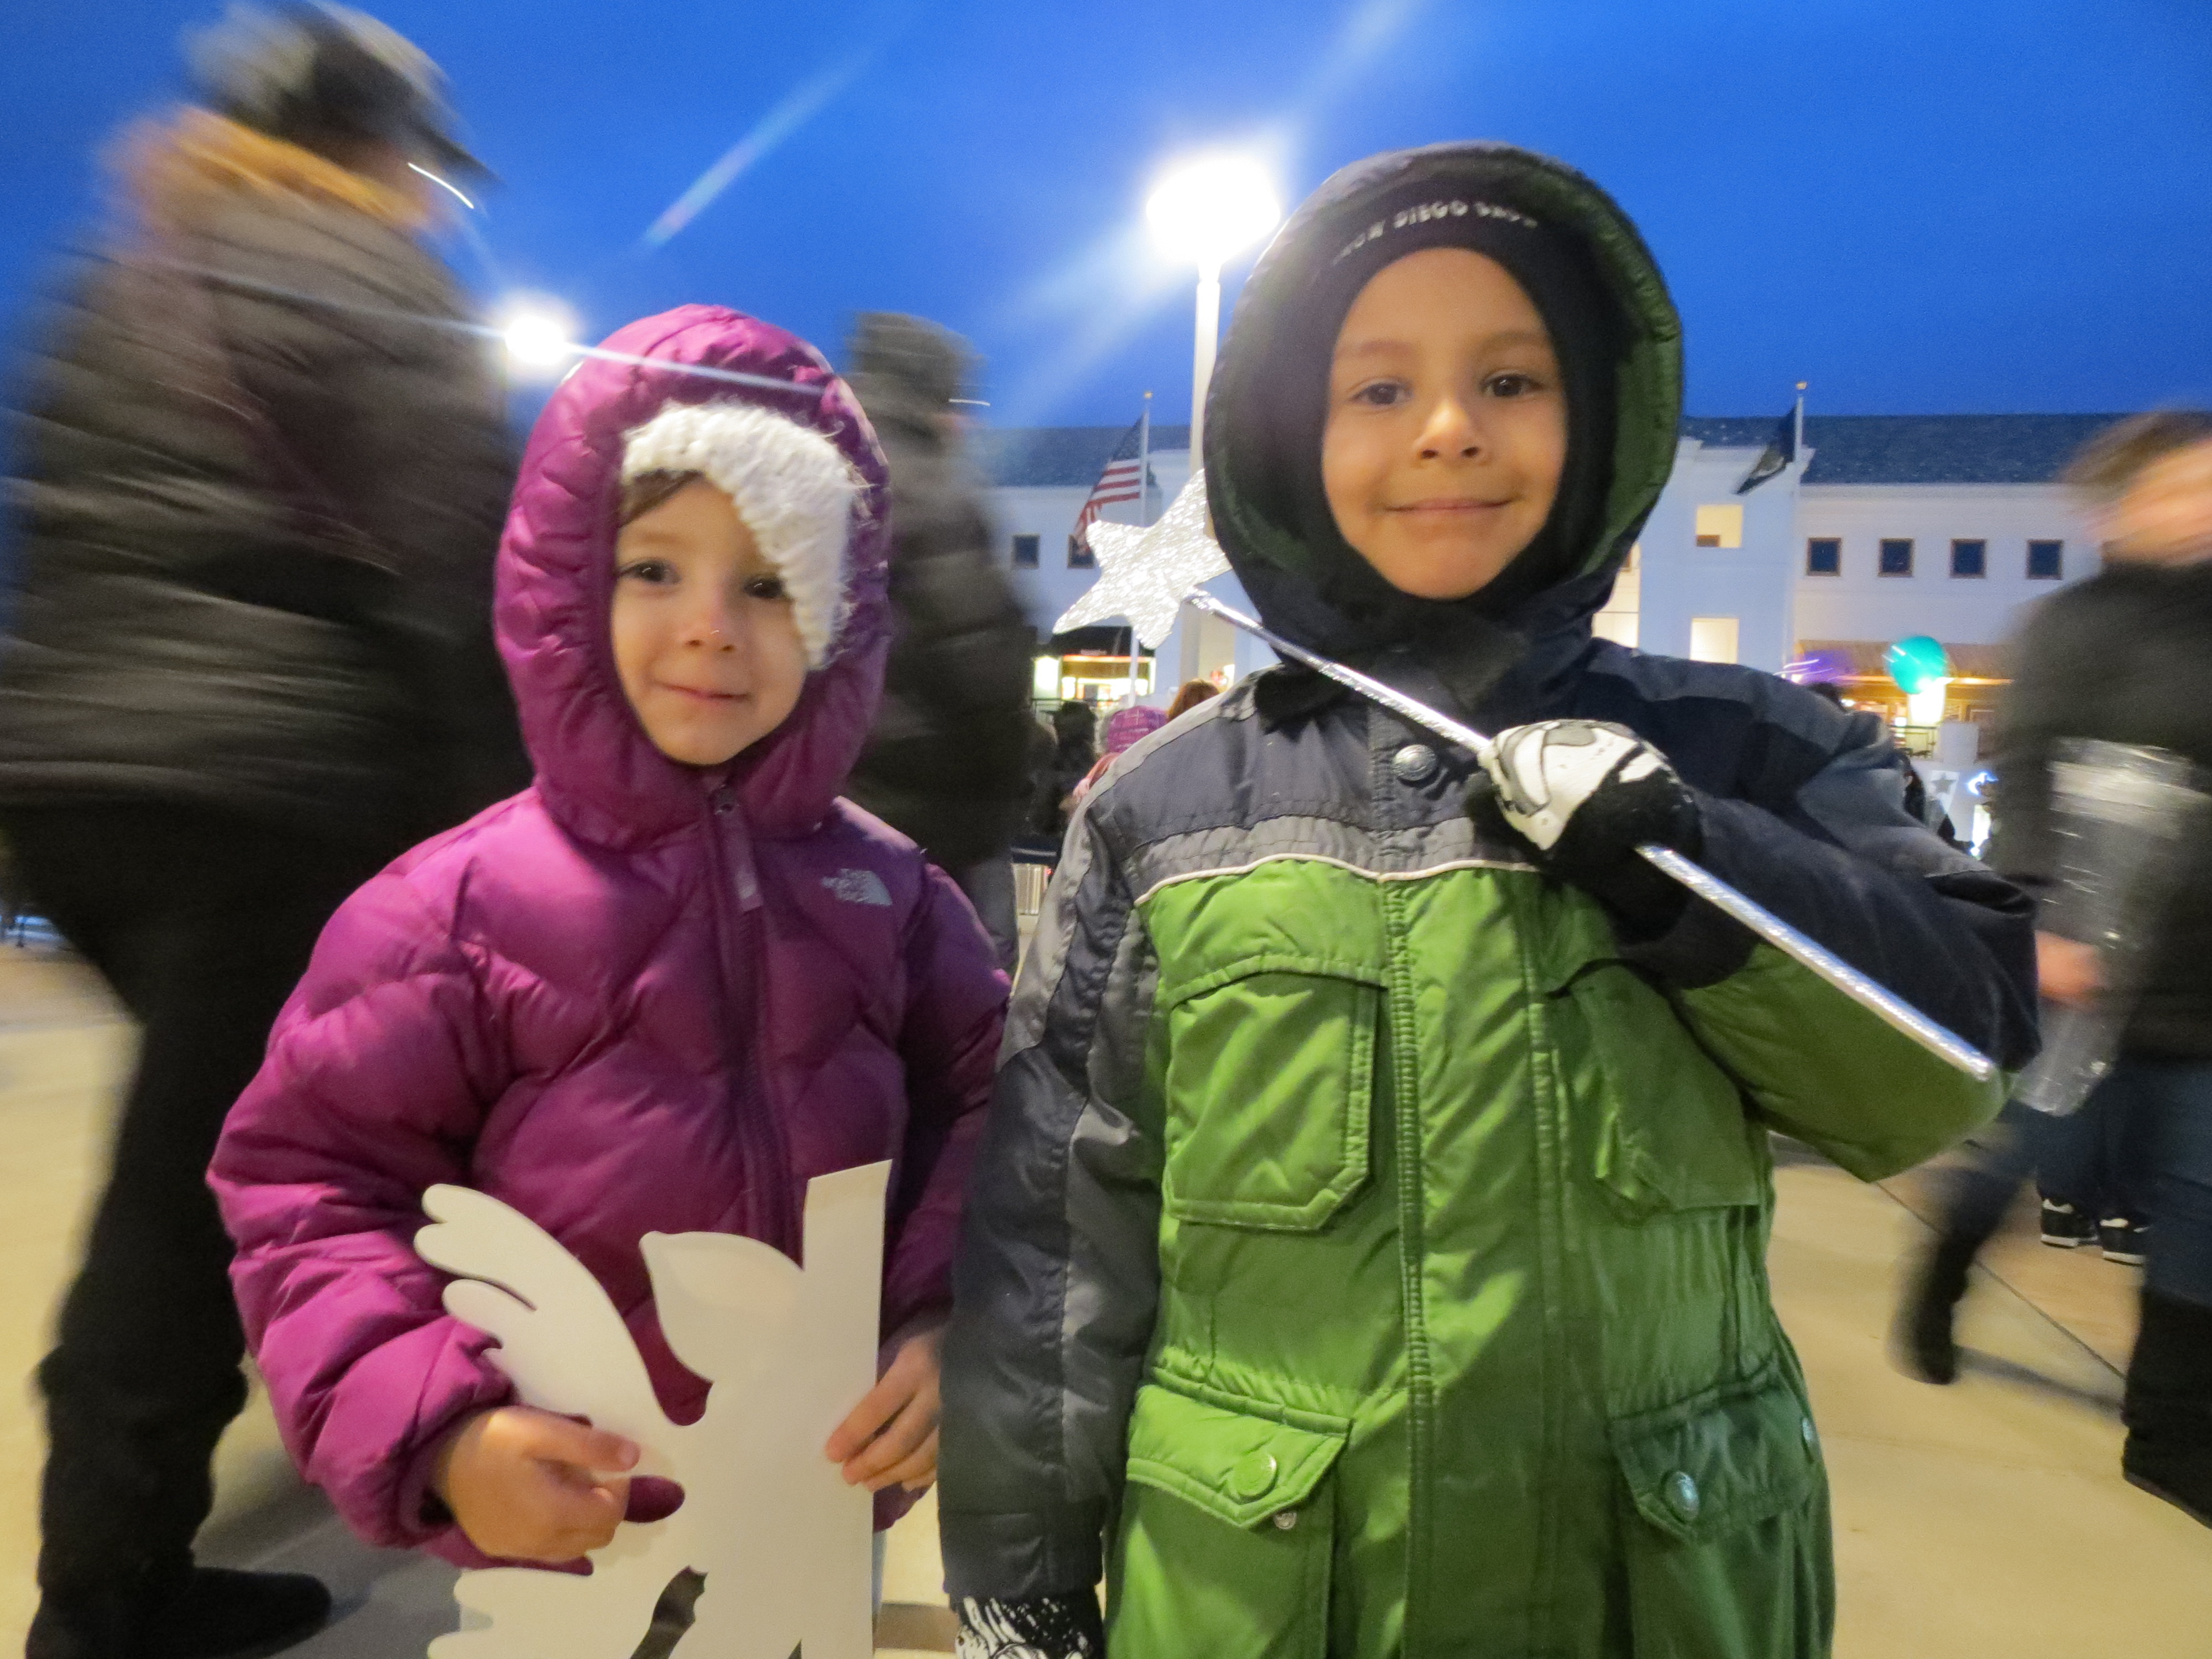 Juliana, 4, and Matthew, 6, were, like many of the children who gathered for the tree lighting, bundled up for a cold - but fun - evening.